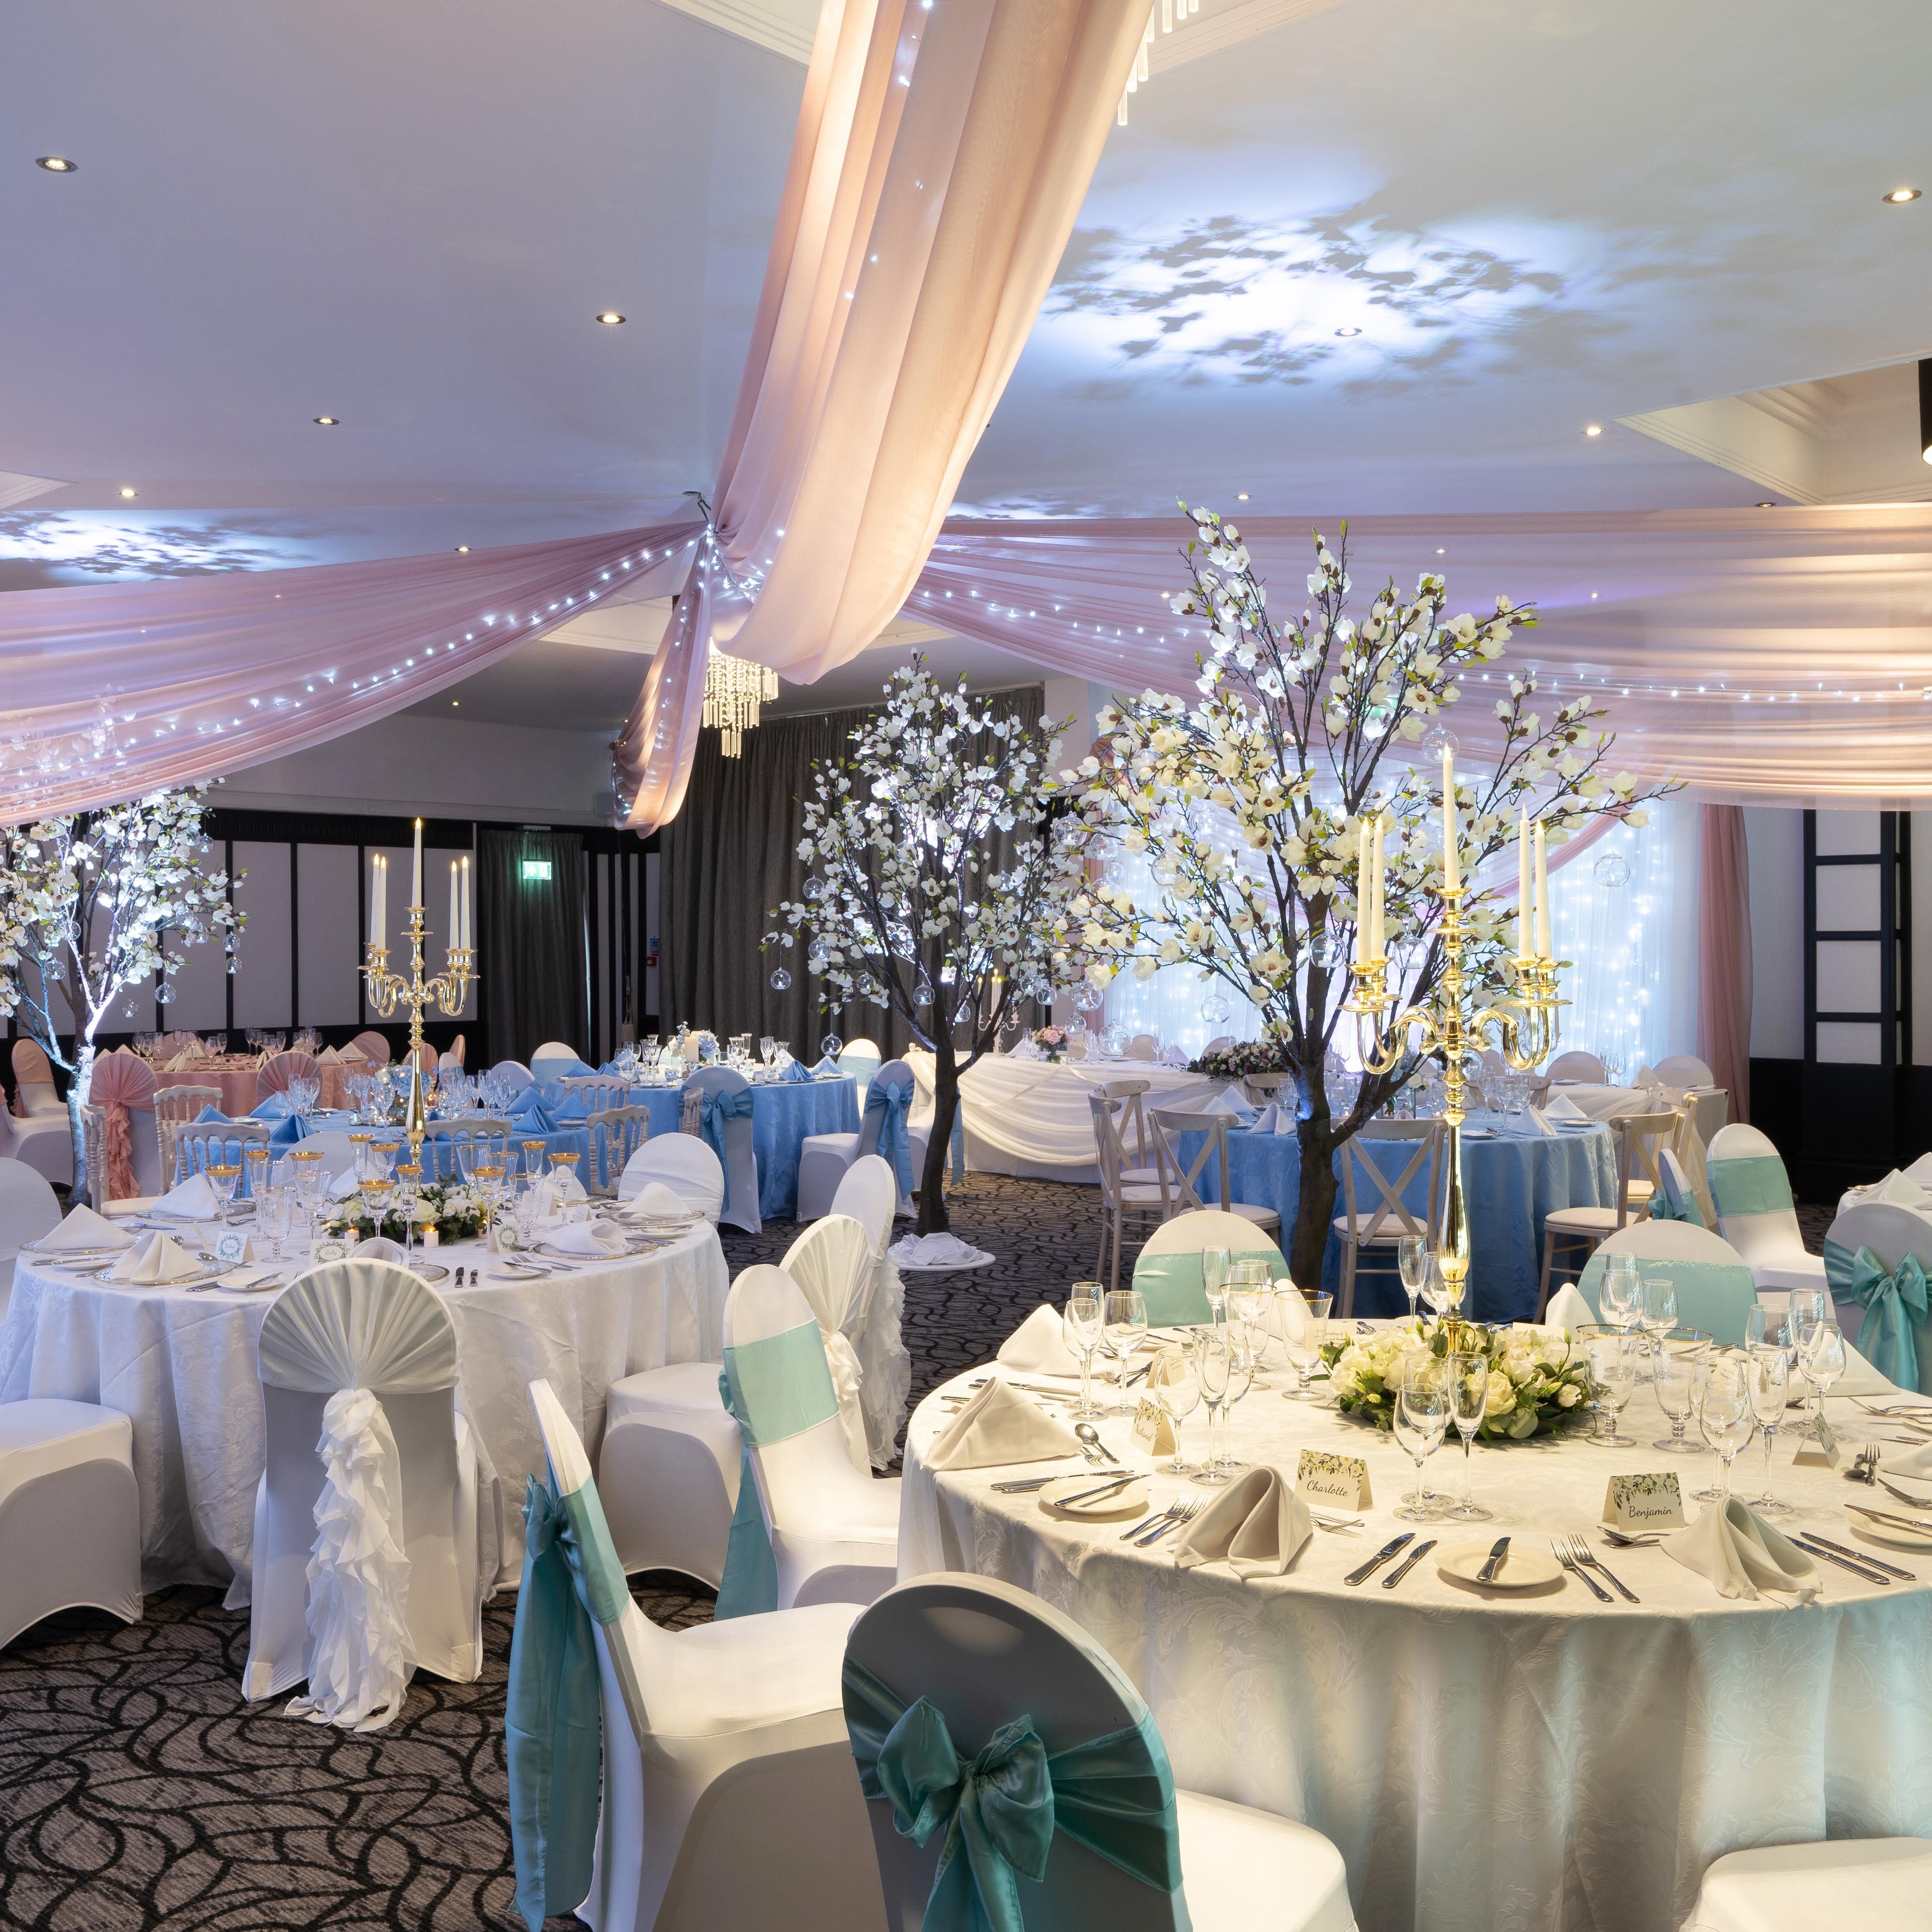 The Grand Ballroom decorated for a wedding.